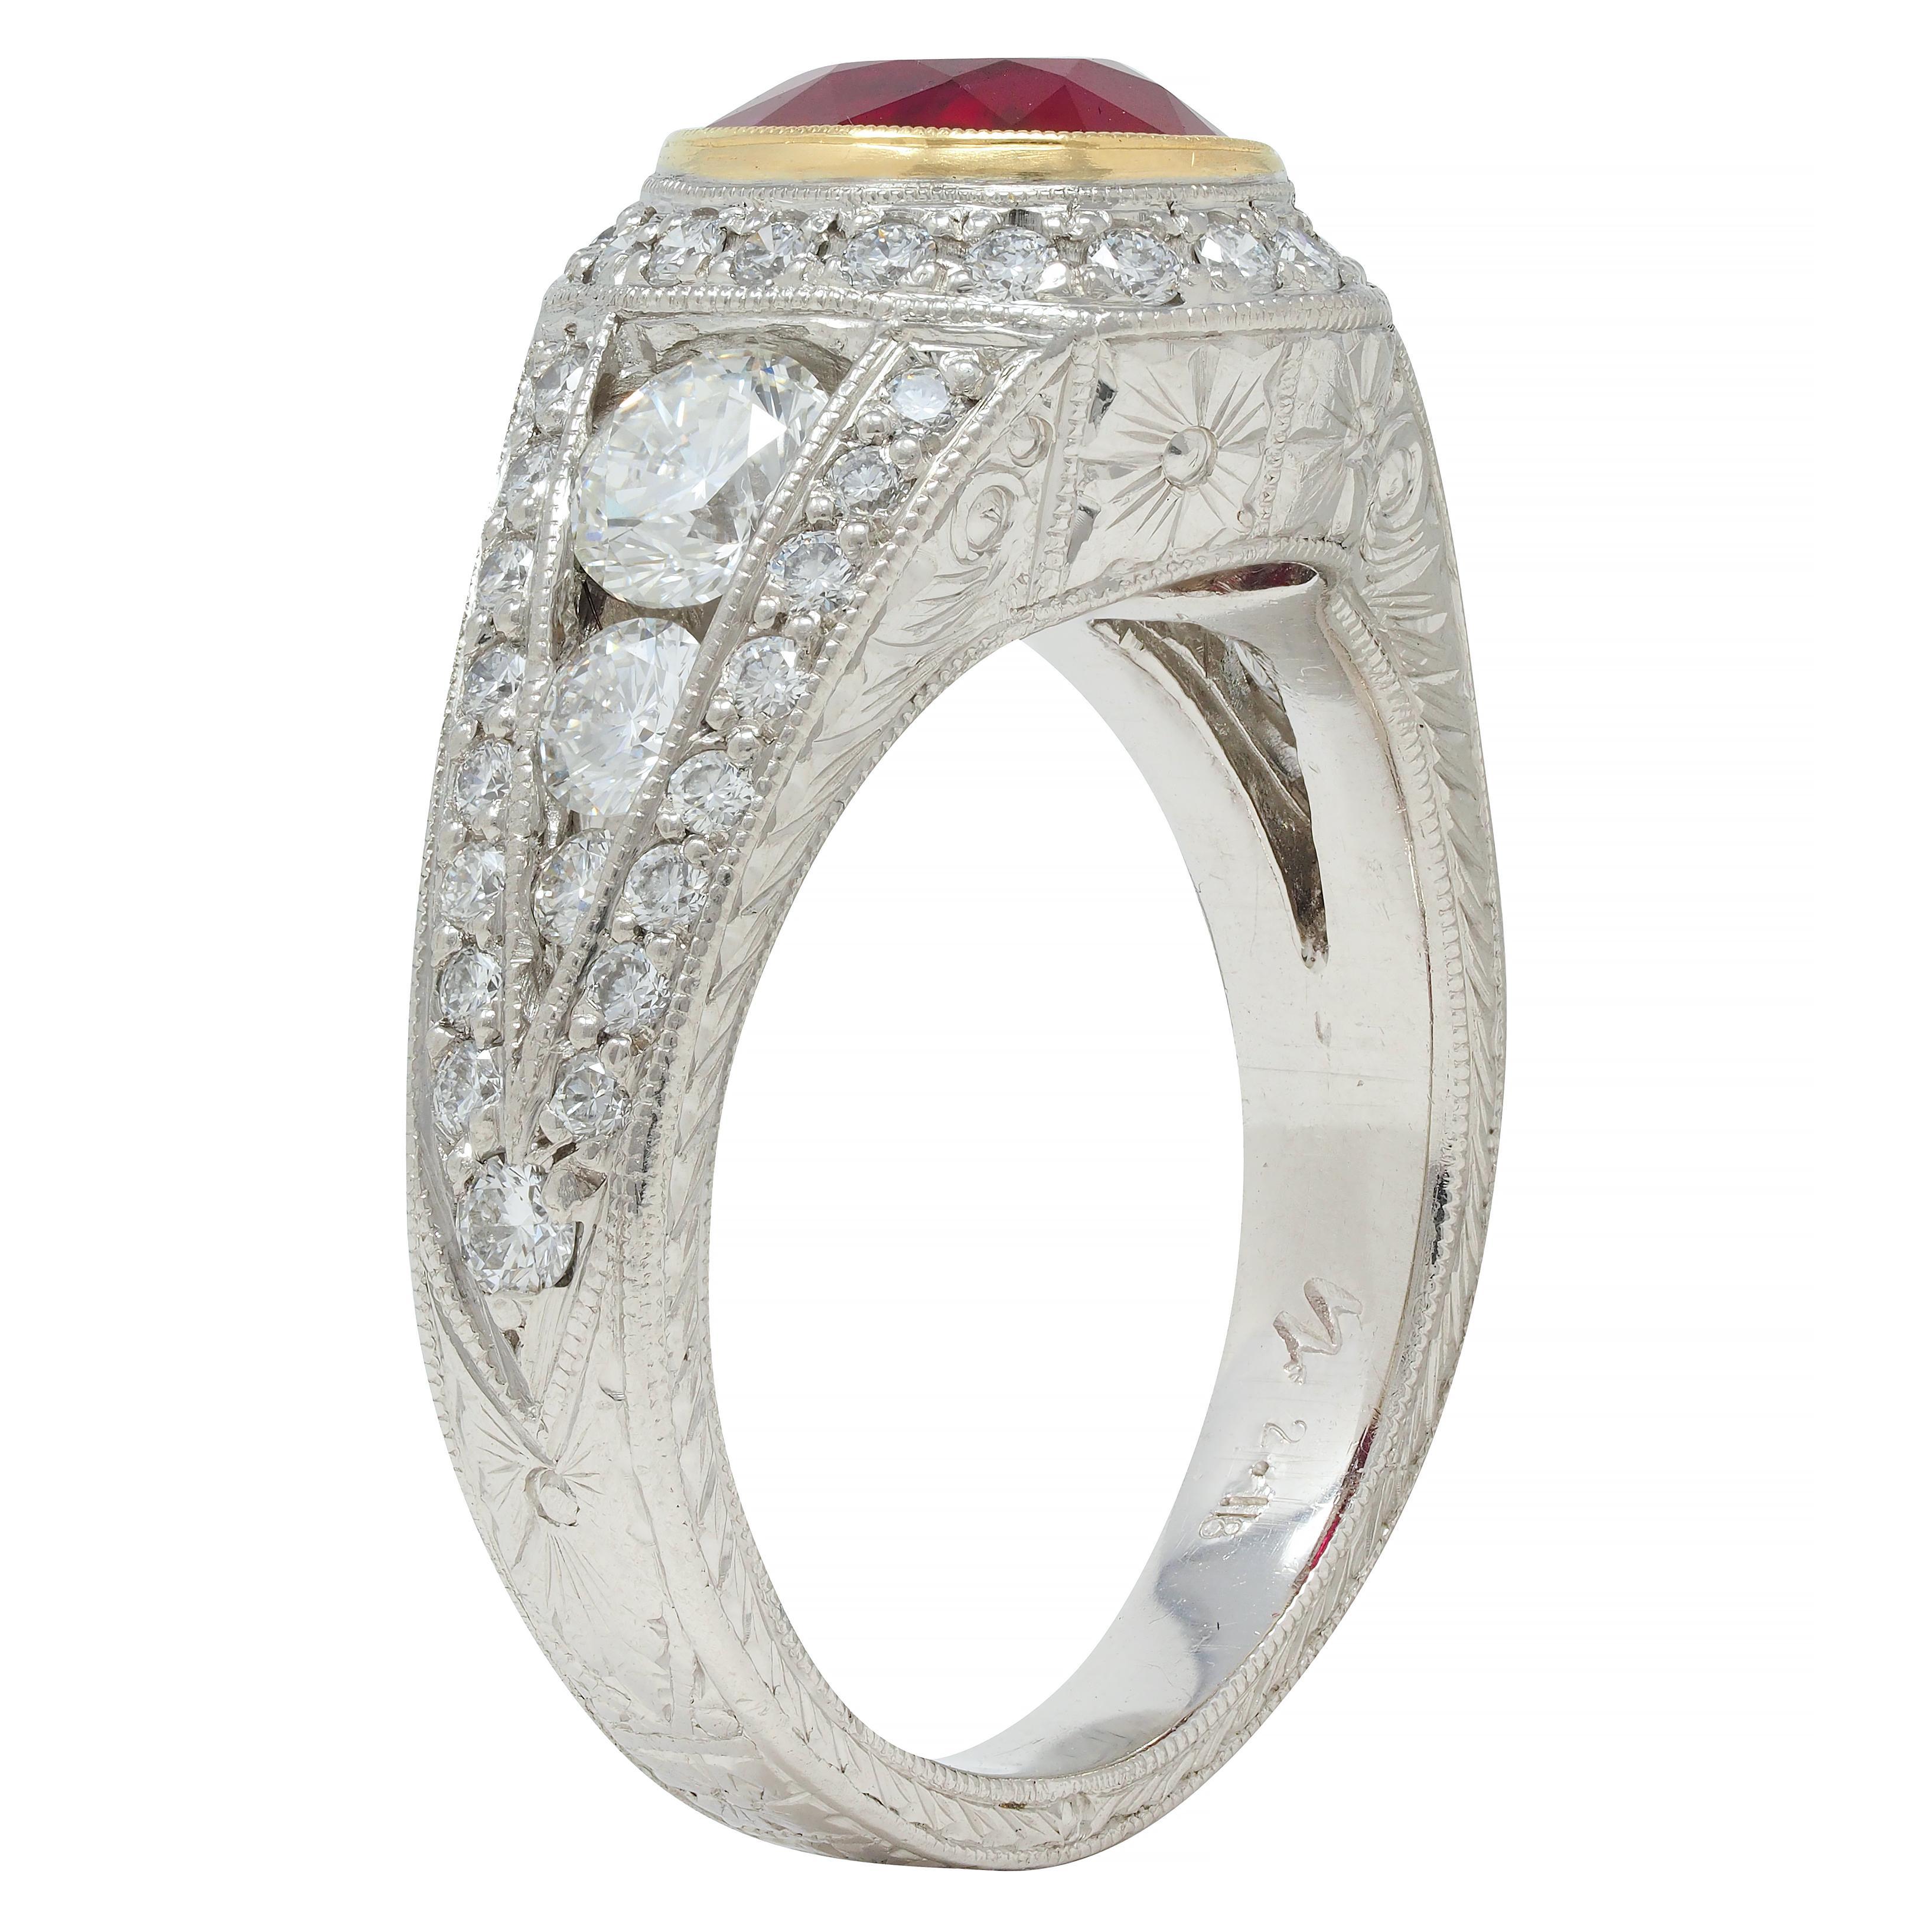 Centering an oval cut ruby weighing 1.92 carats - transparent vivid red in color 
Natural Burmese in origin with minor indications of treatment residue 
Bezel set in yellow gold with a halo surround of round brilliant cut diamonds
With additional